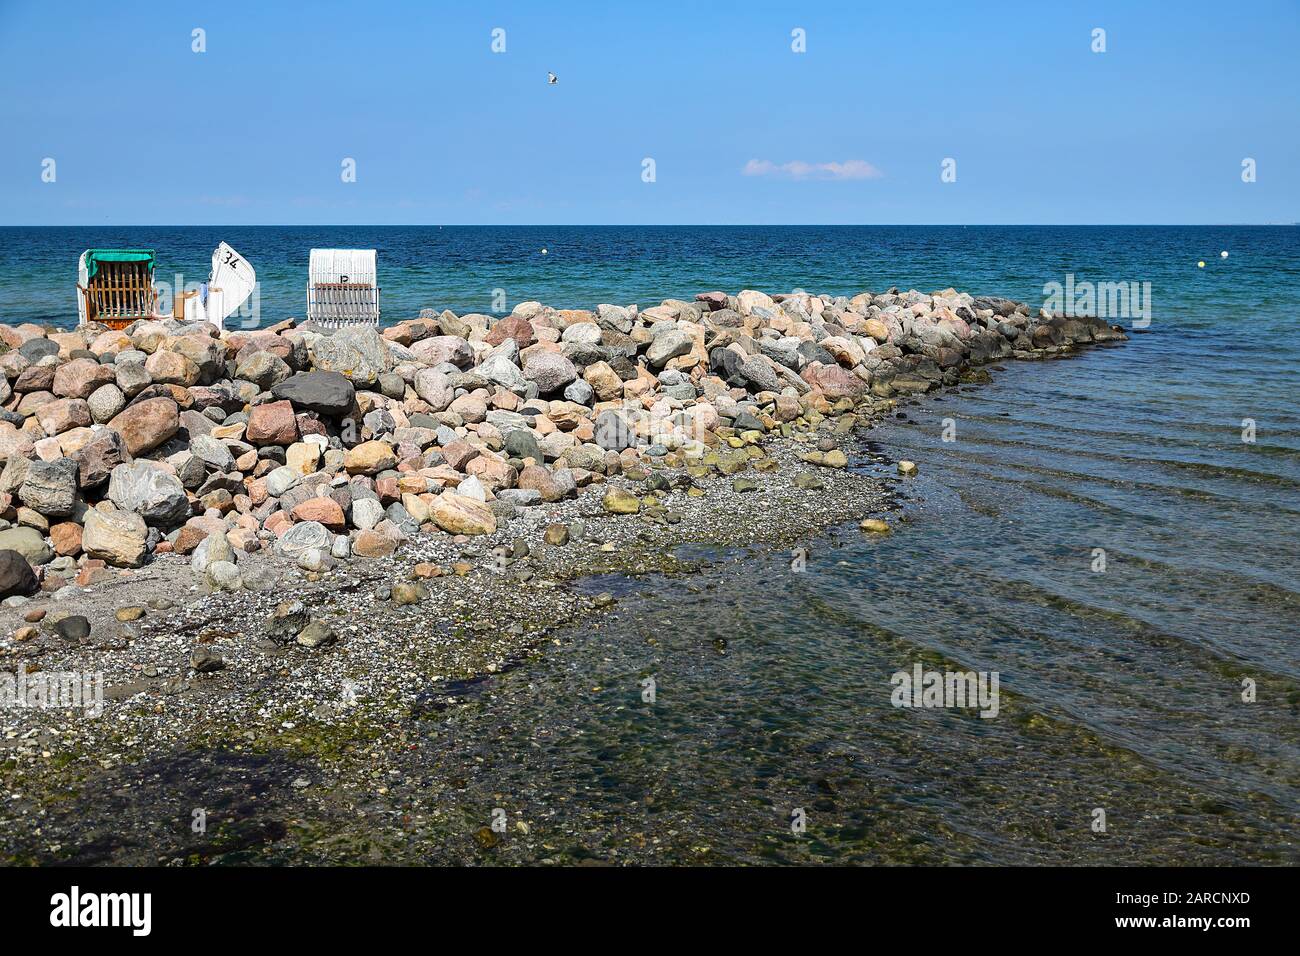 An unusual place for beach chairs - but the view of the Baltic Sea is perfect. Stock Photo